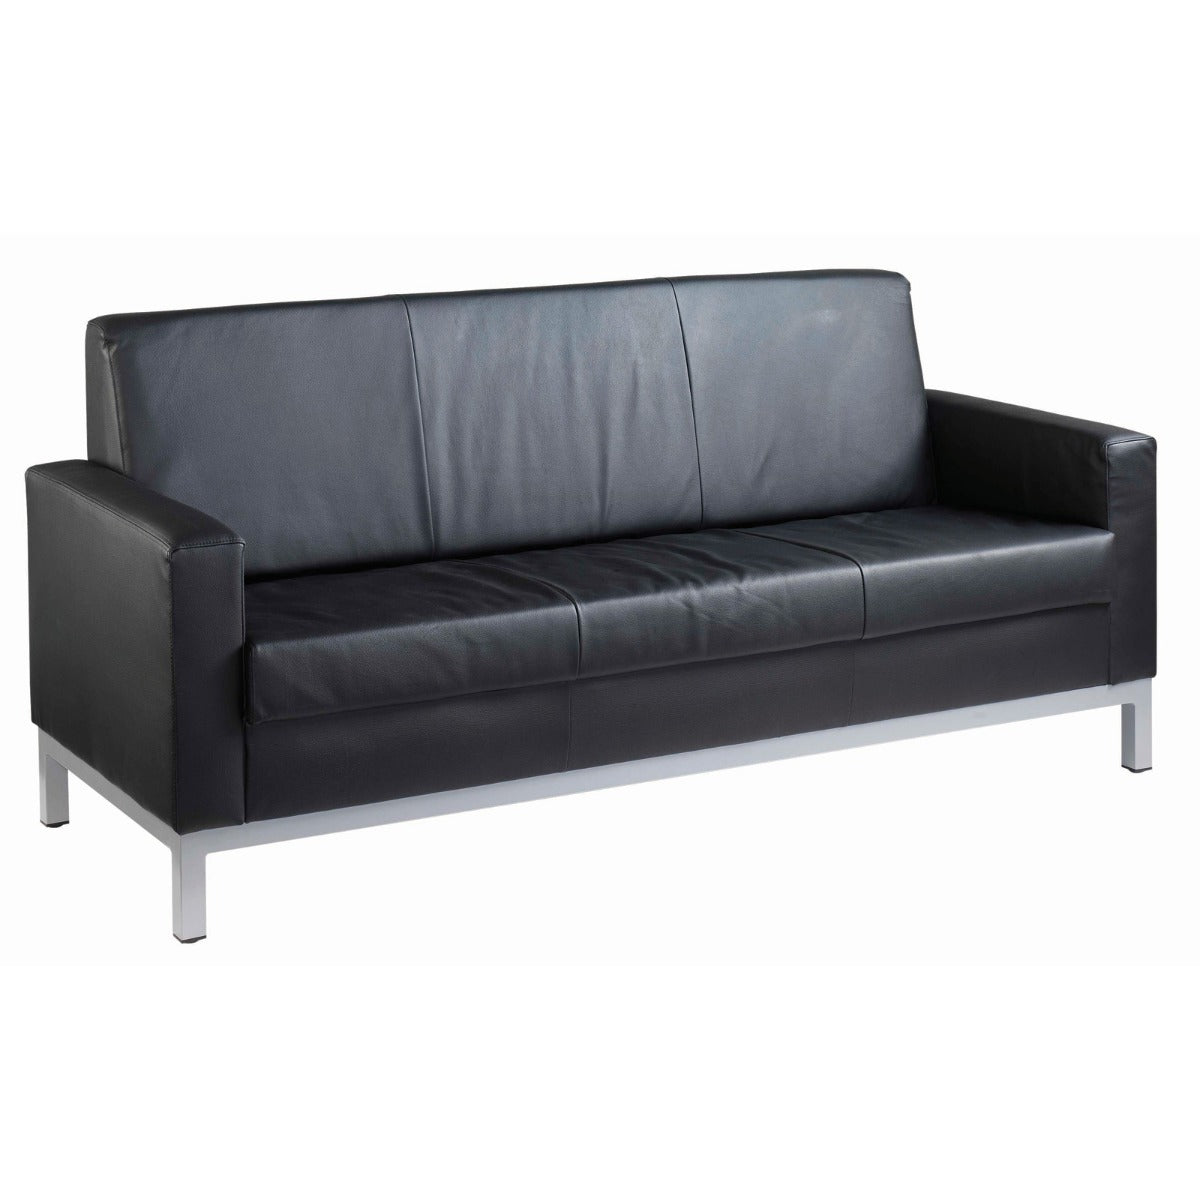 Helsinki Faux Leather Sofa - 1, 2, 3 Seater Available